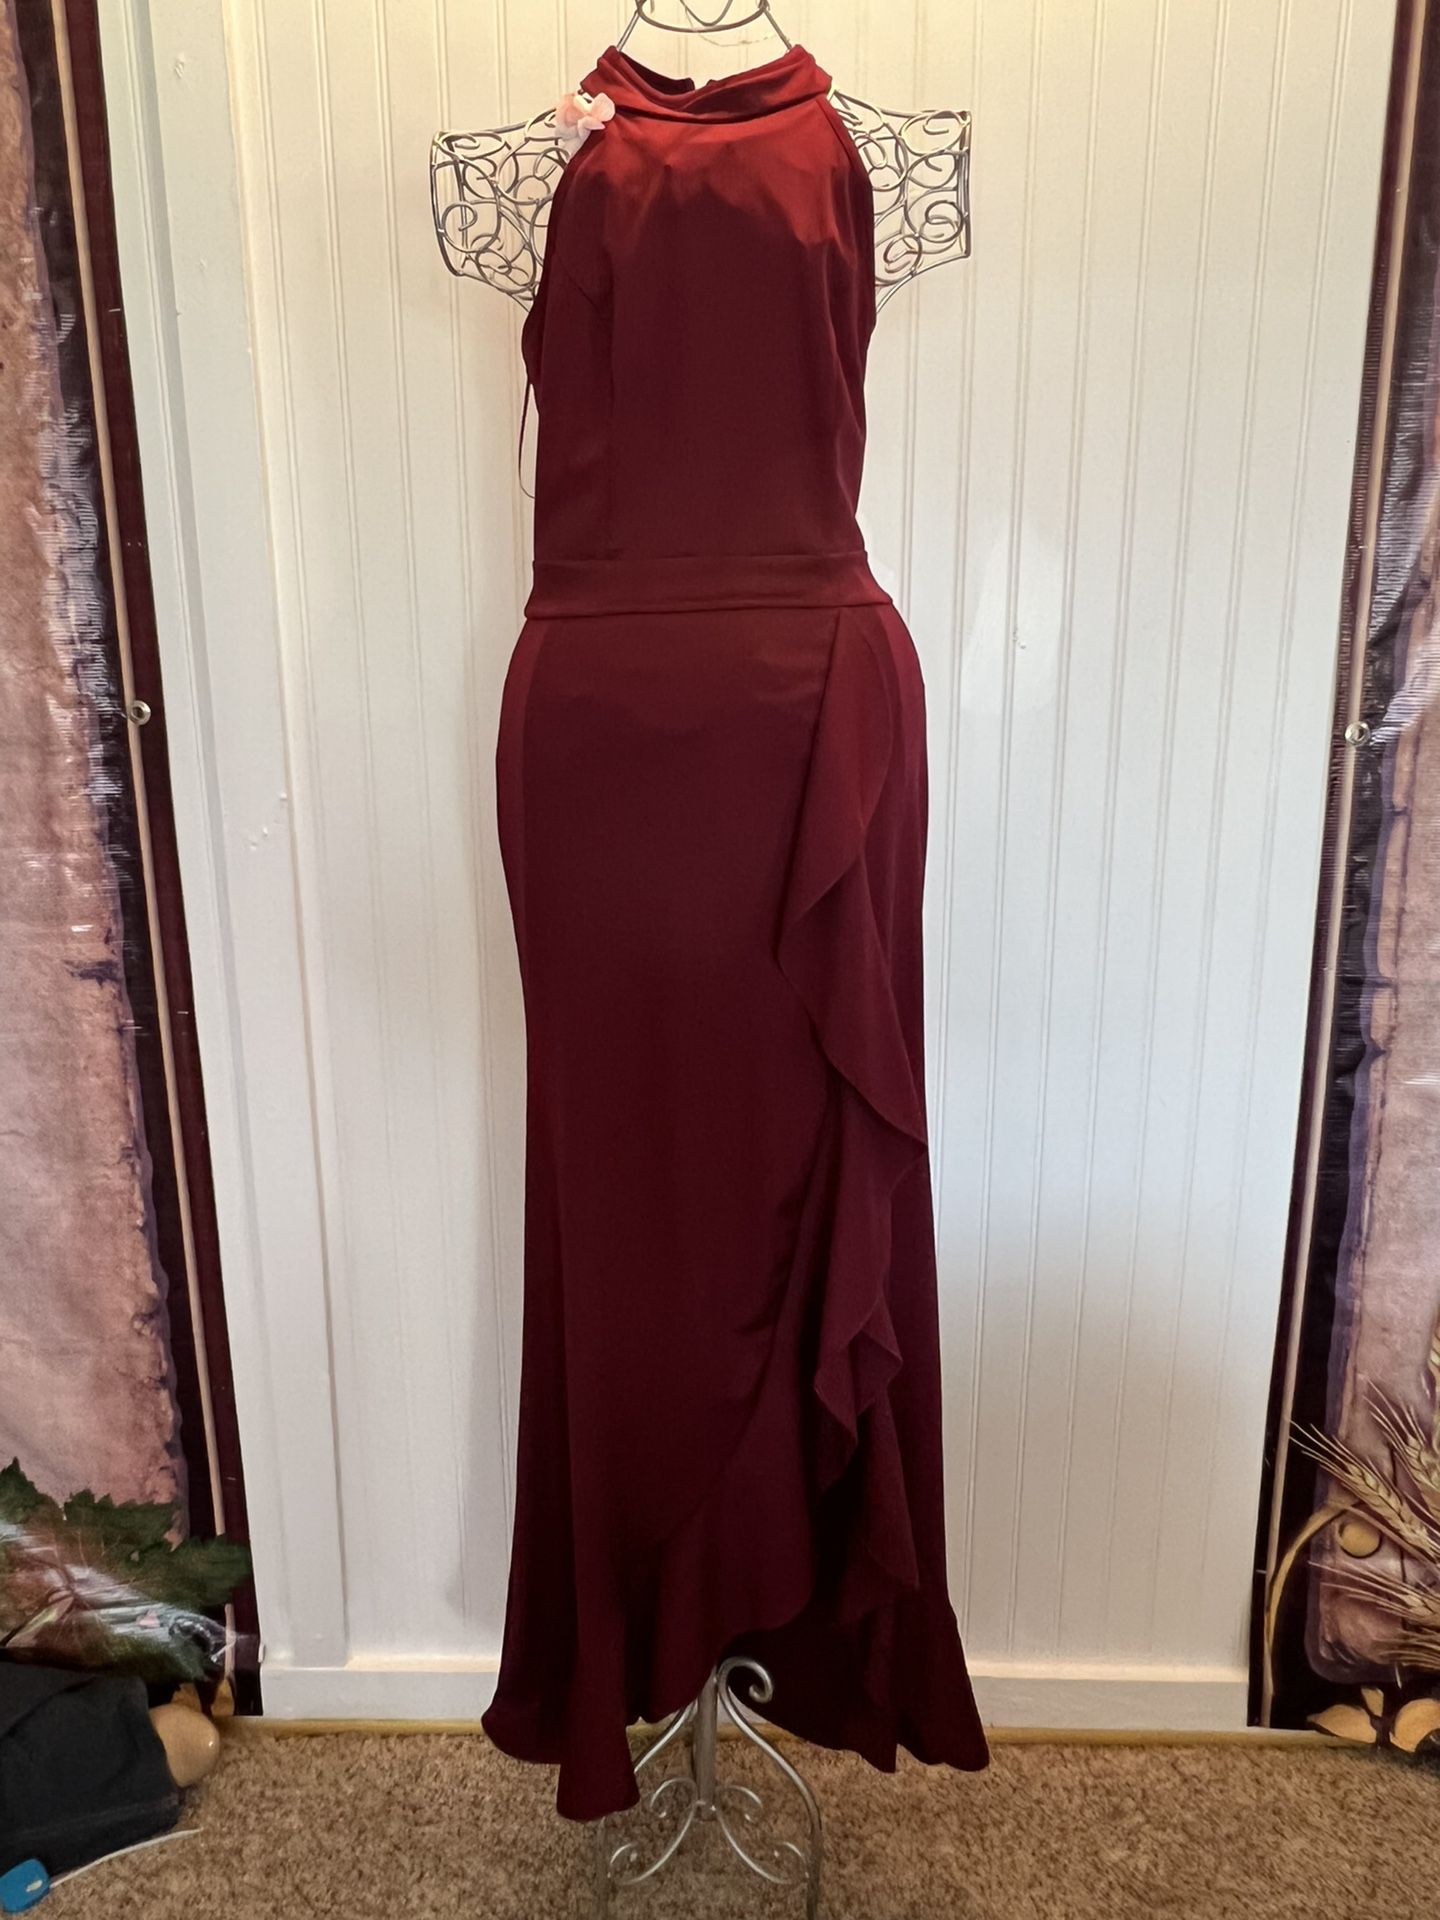 Beautiful wine color party dress Size S The fabric stretches